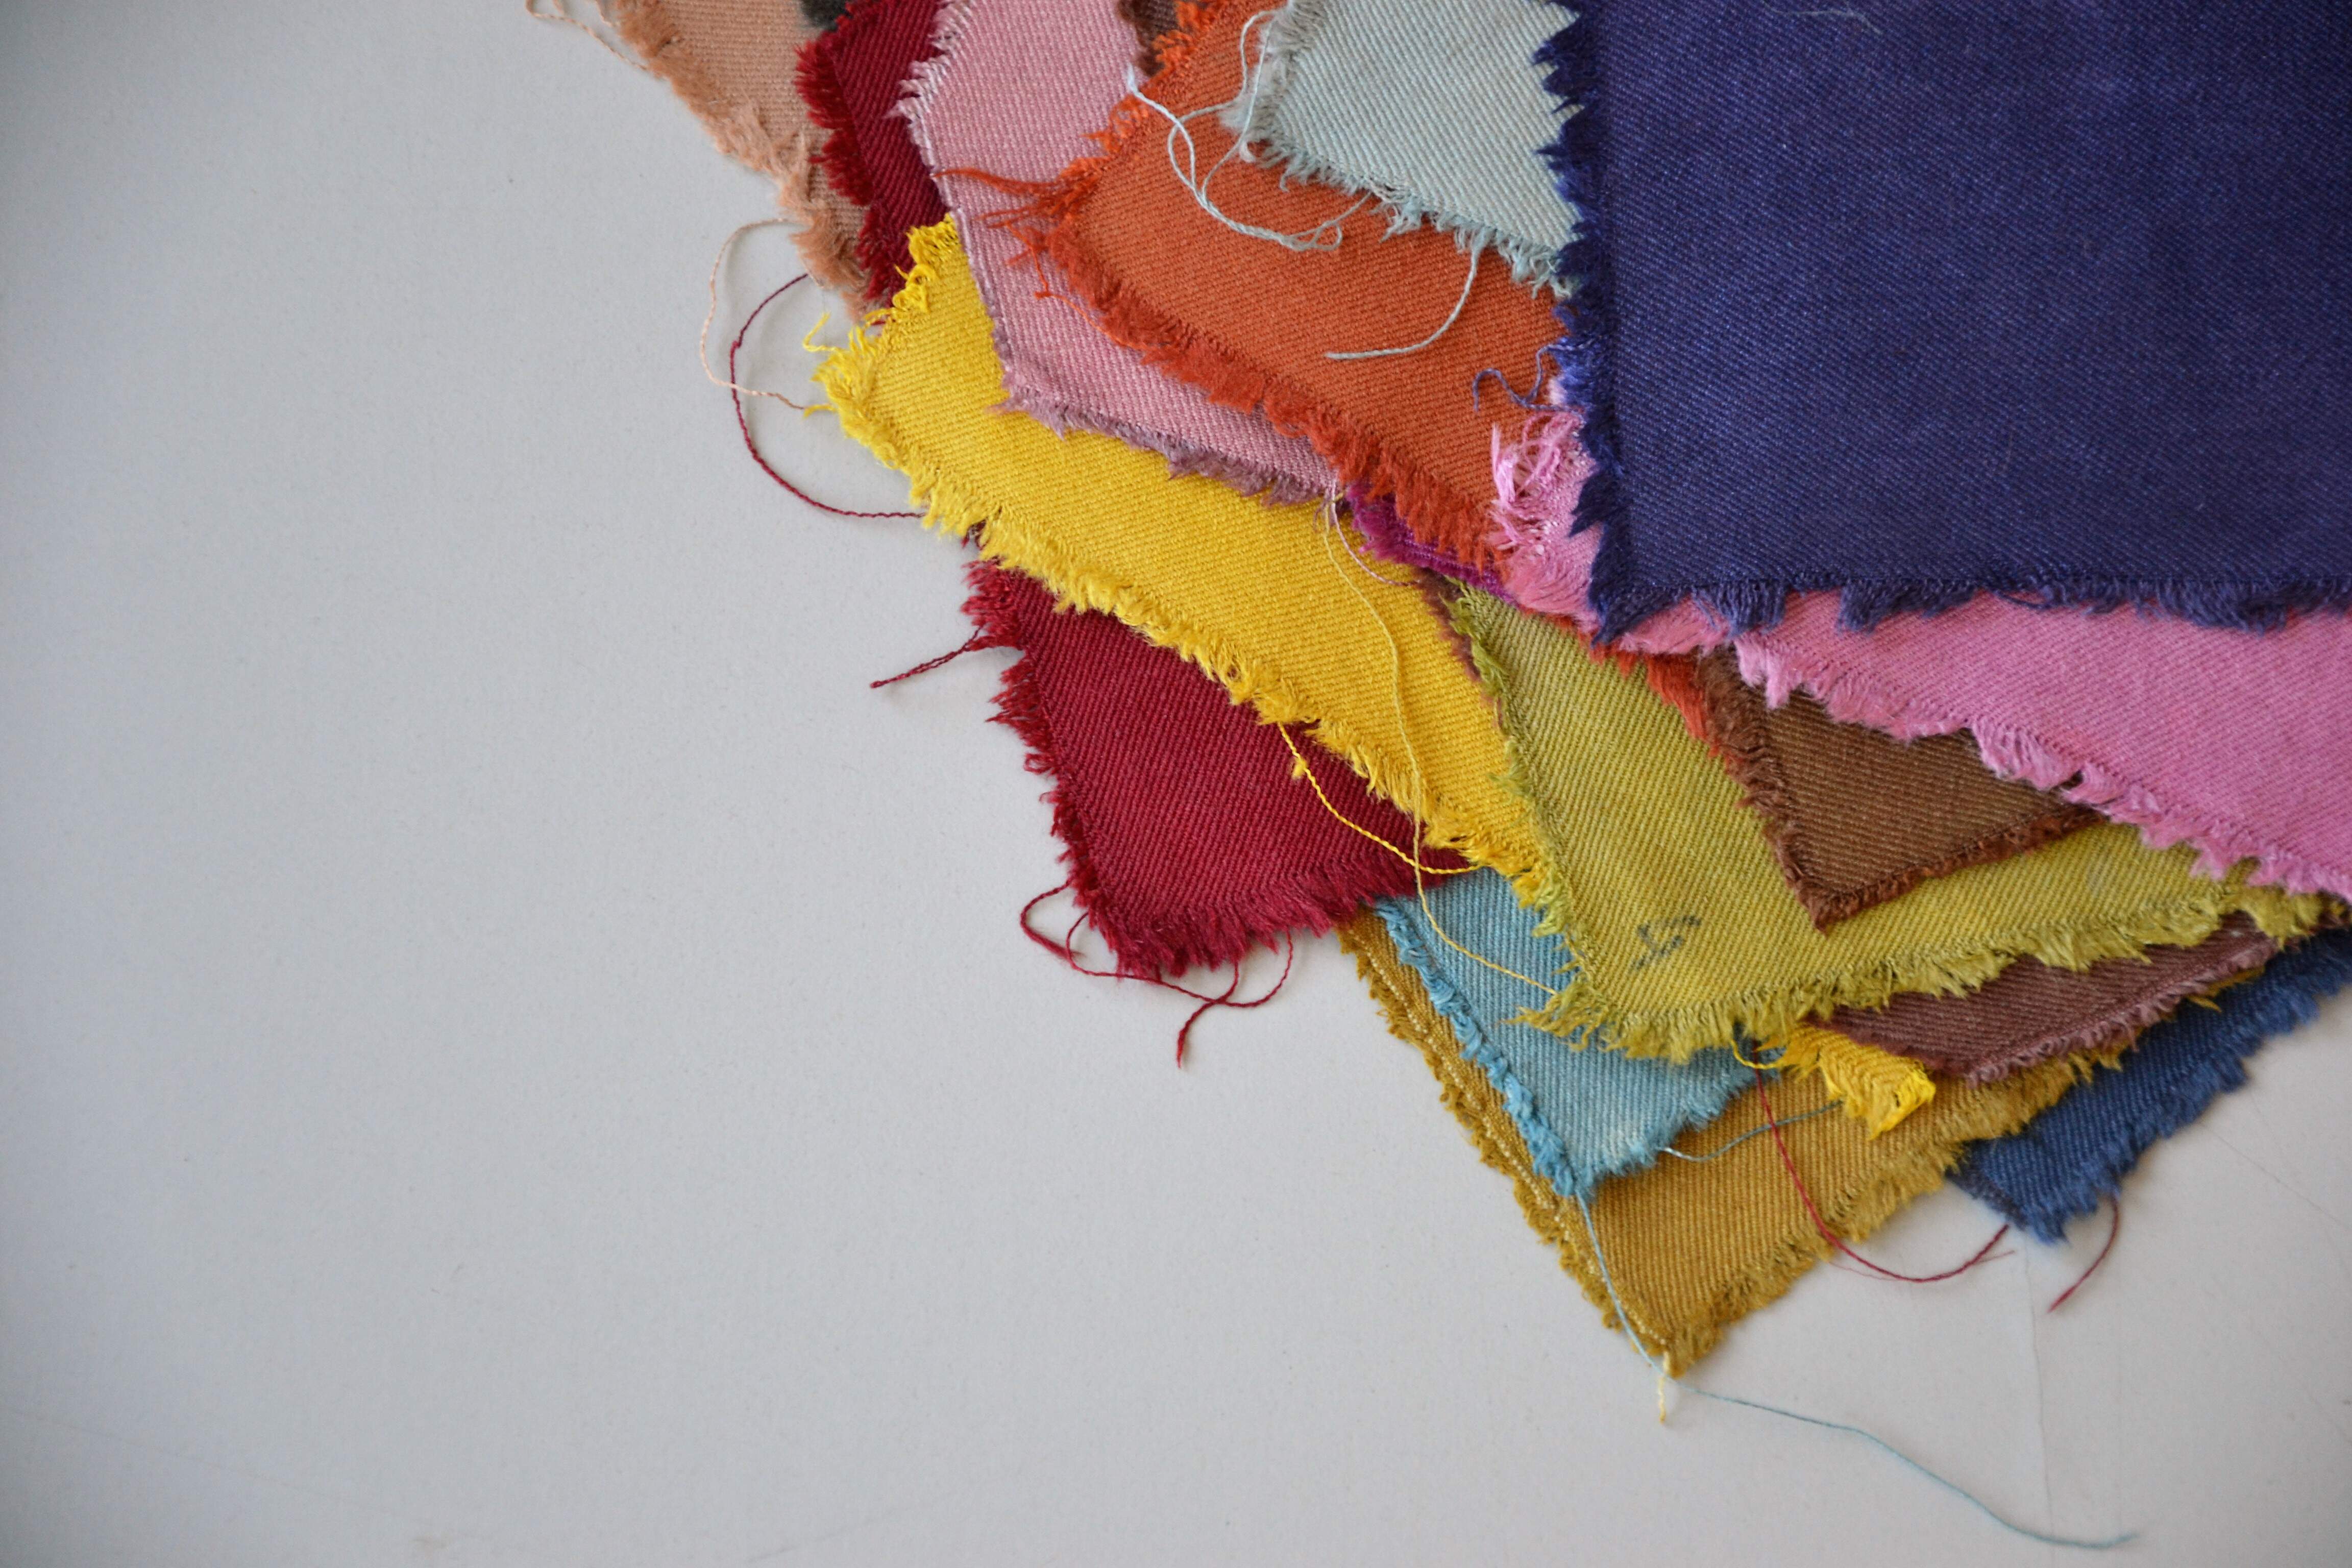 Samples of naturally dyed wool. (Logwood, cochineal, indigo, brazilwood, madder, fustic chips)